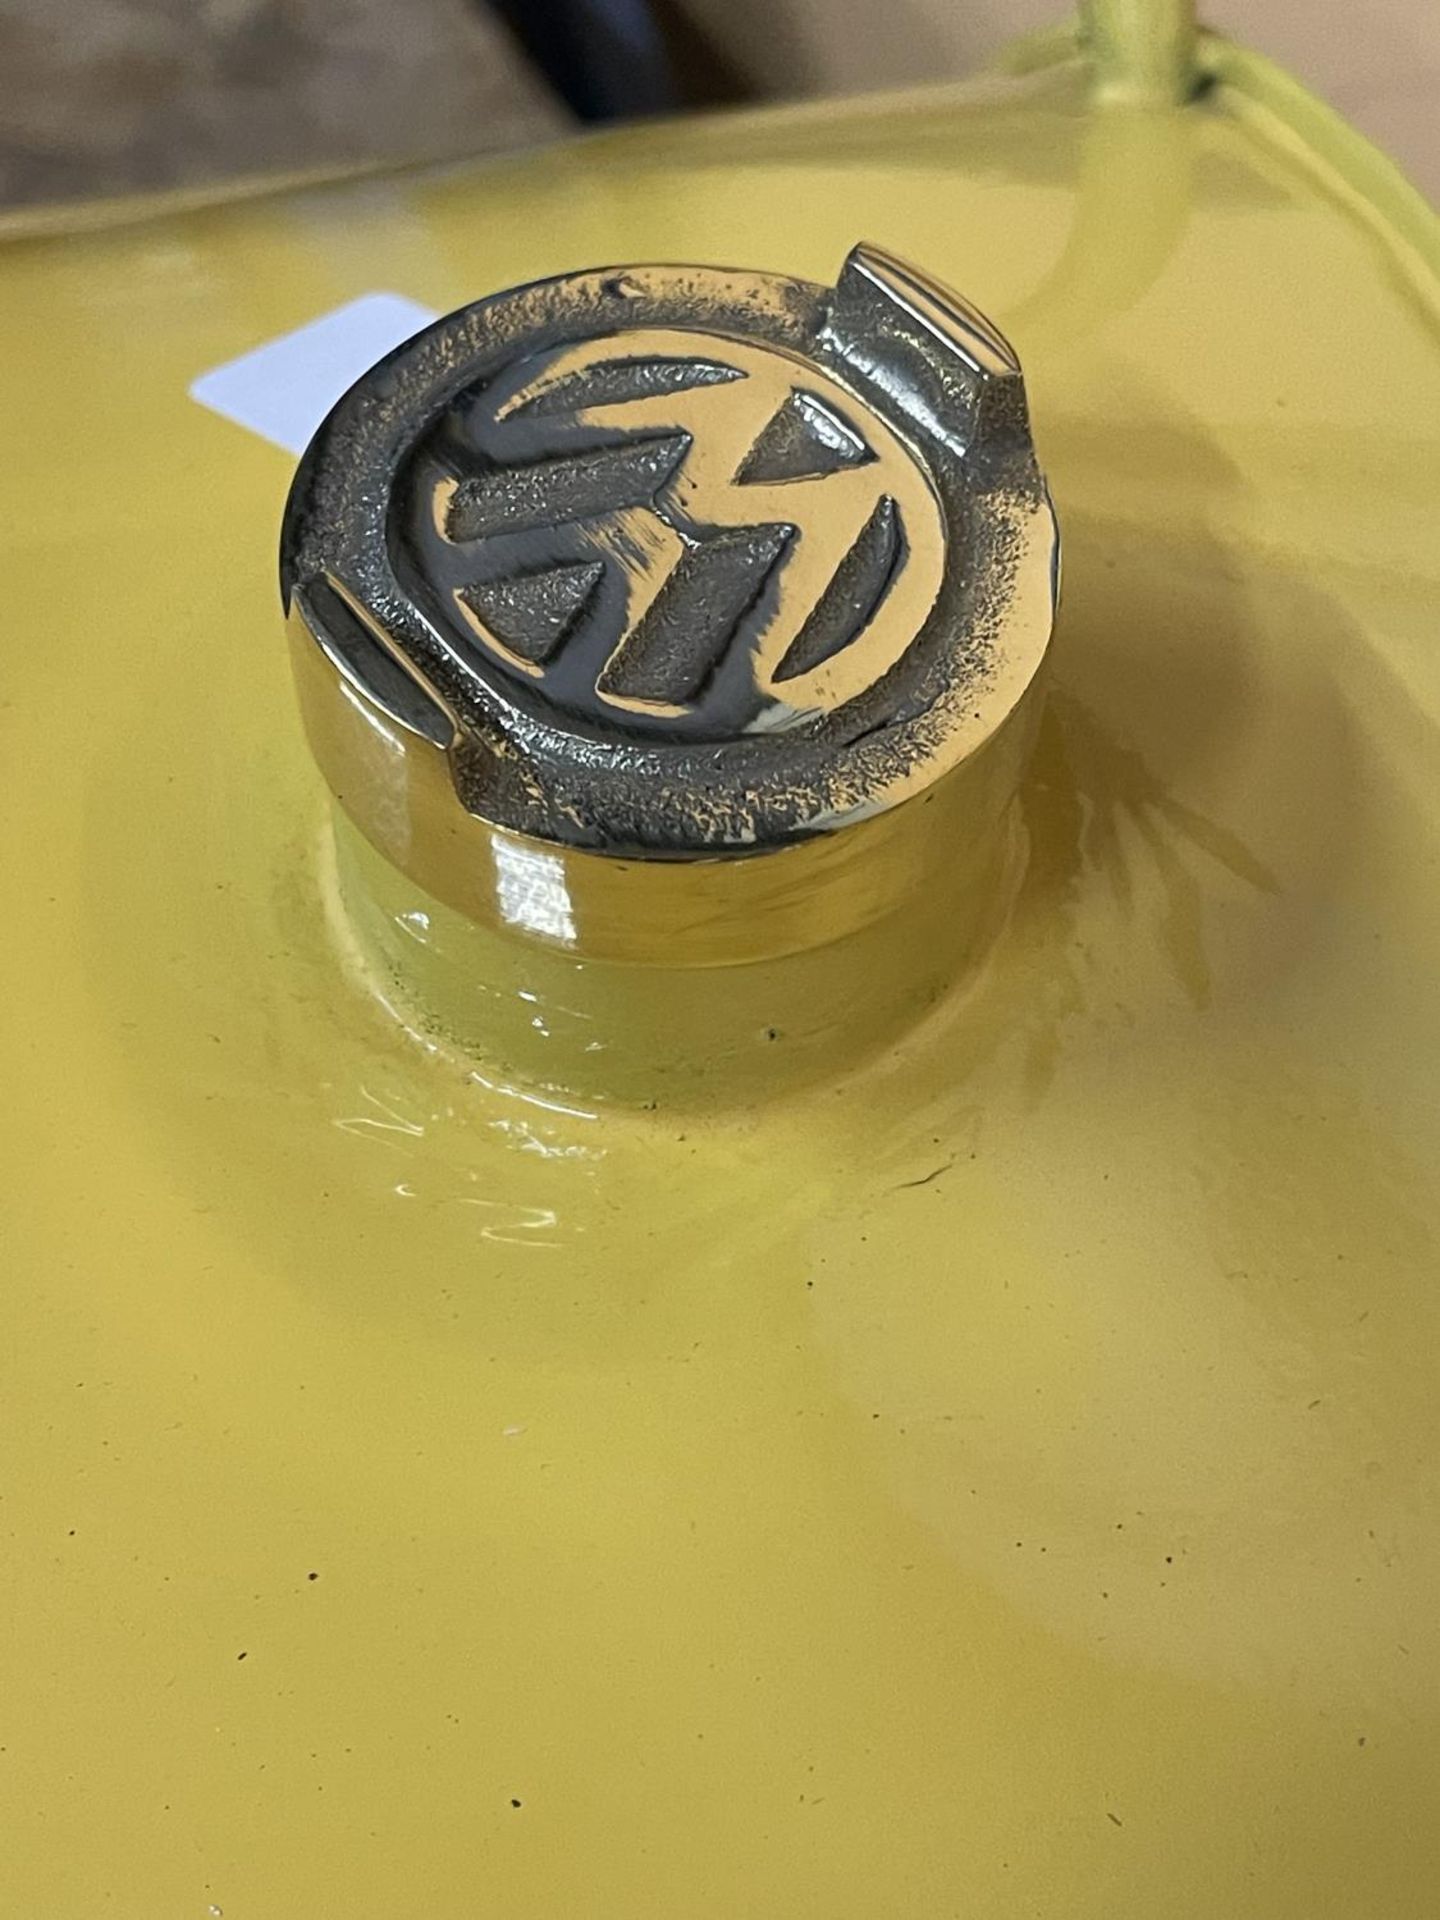 A YELLOW VOLKSWAGON PETROL CAN - Image 3 of 3